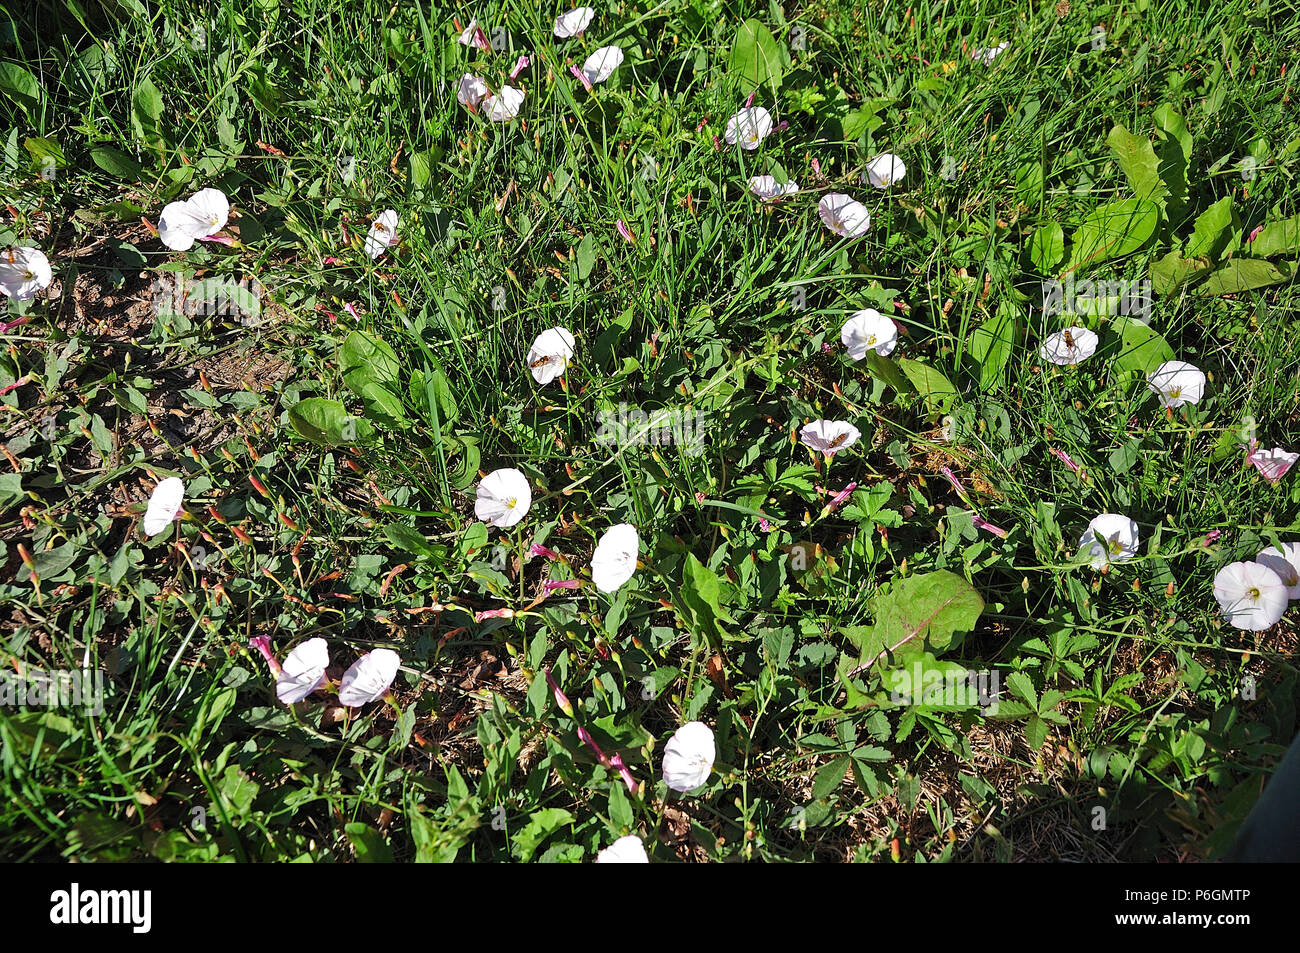 meadow with short grass and creeping bindweed calystegia in bright sunlight Stock Photo